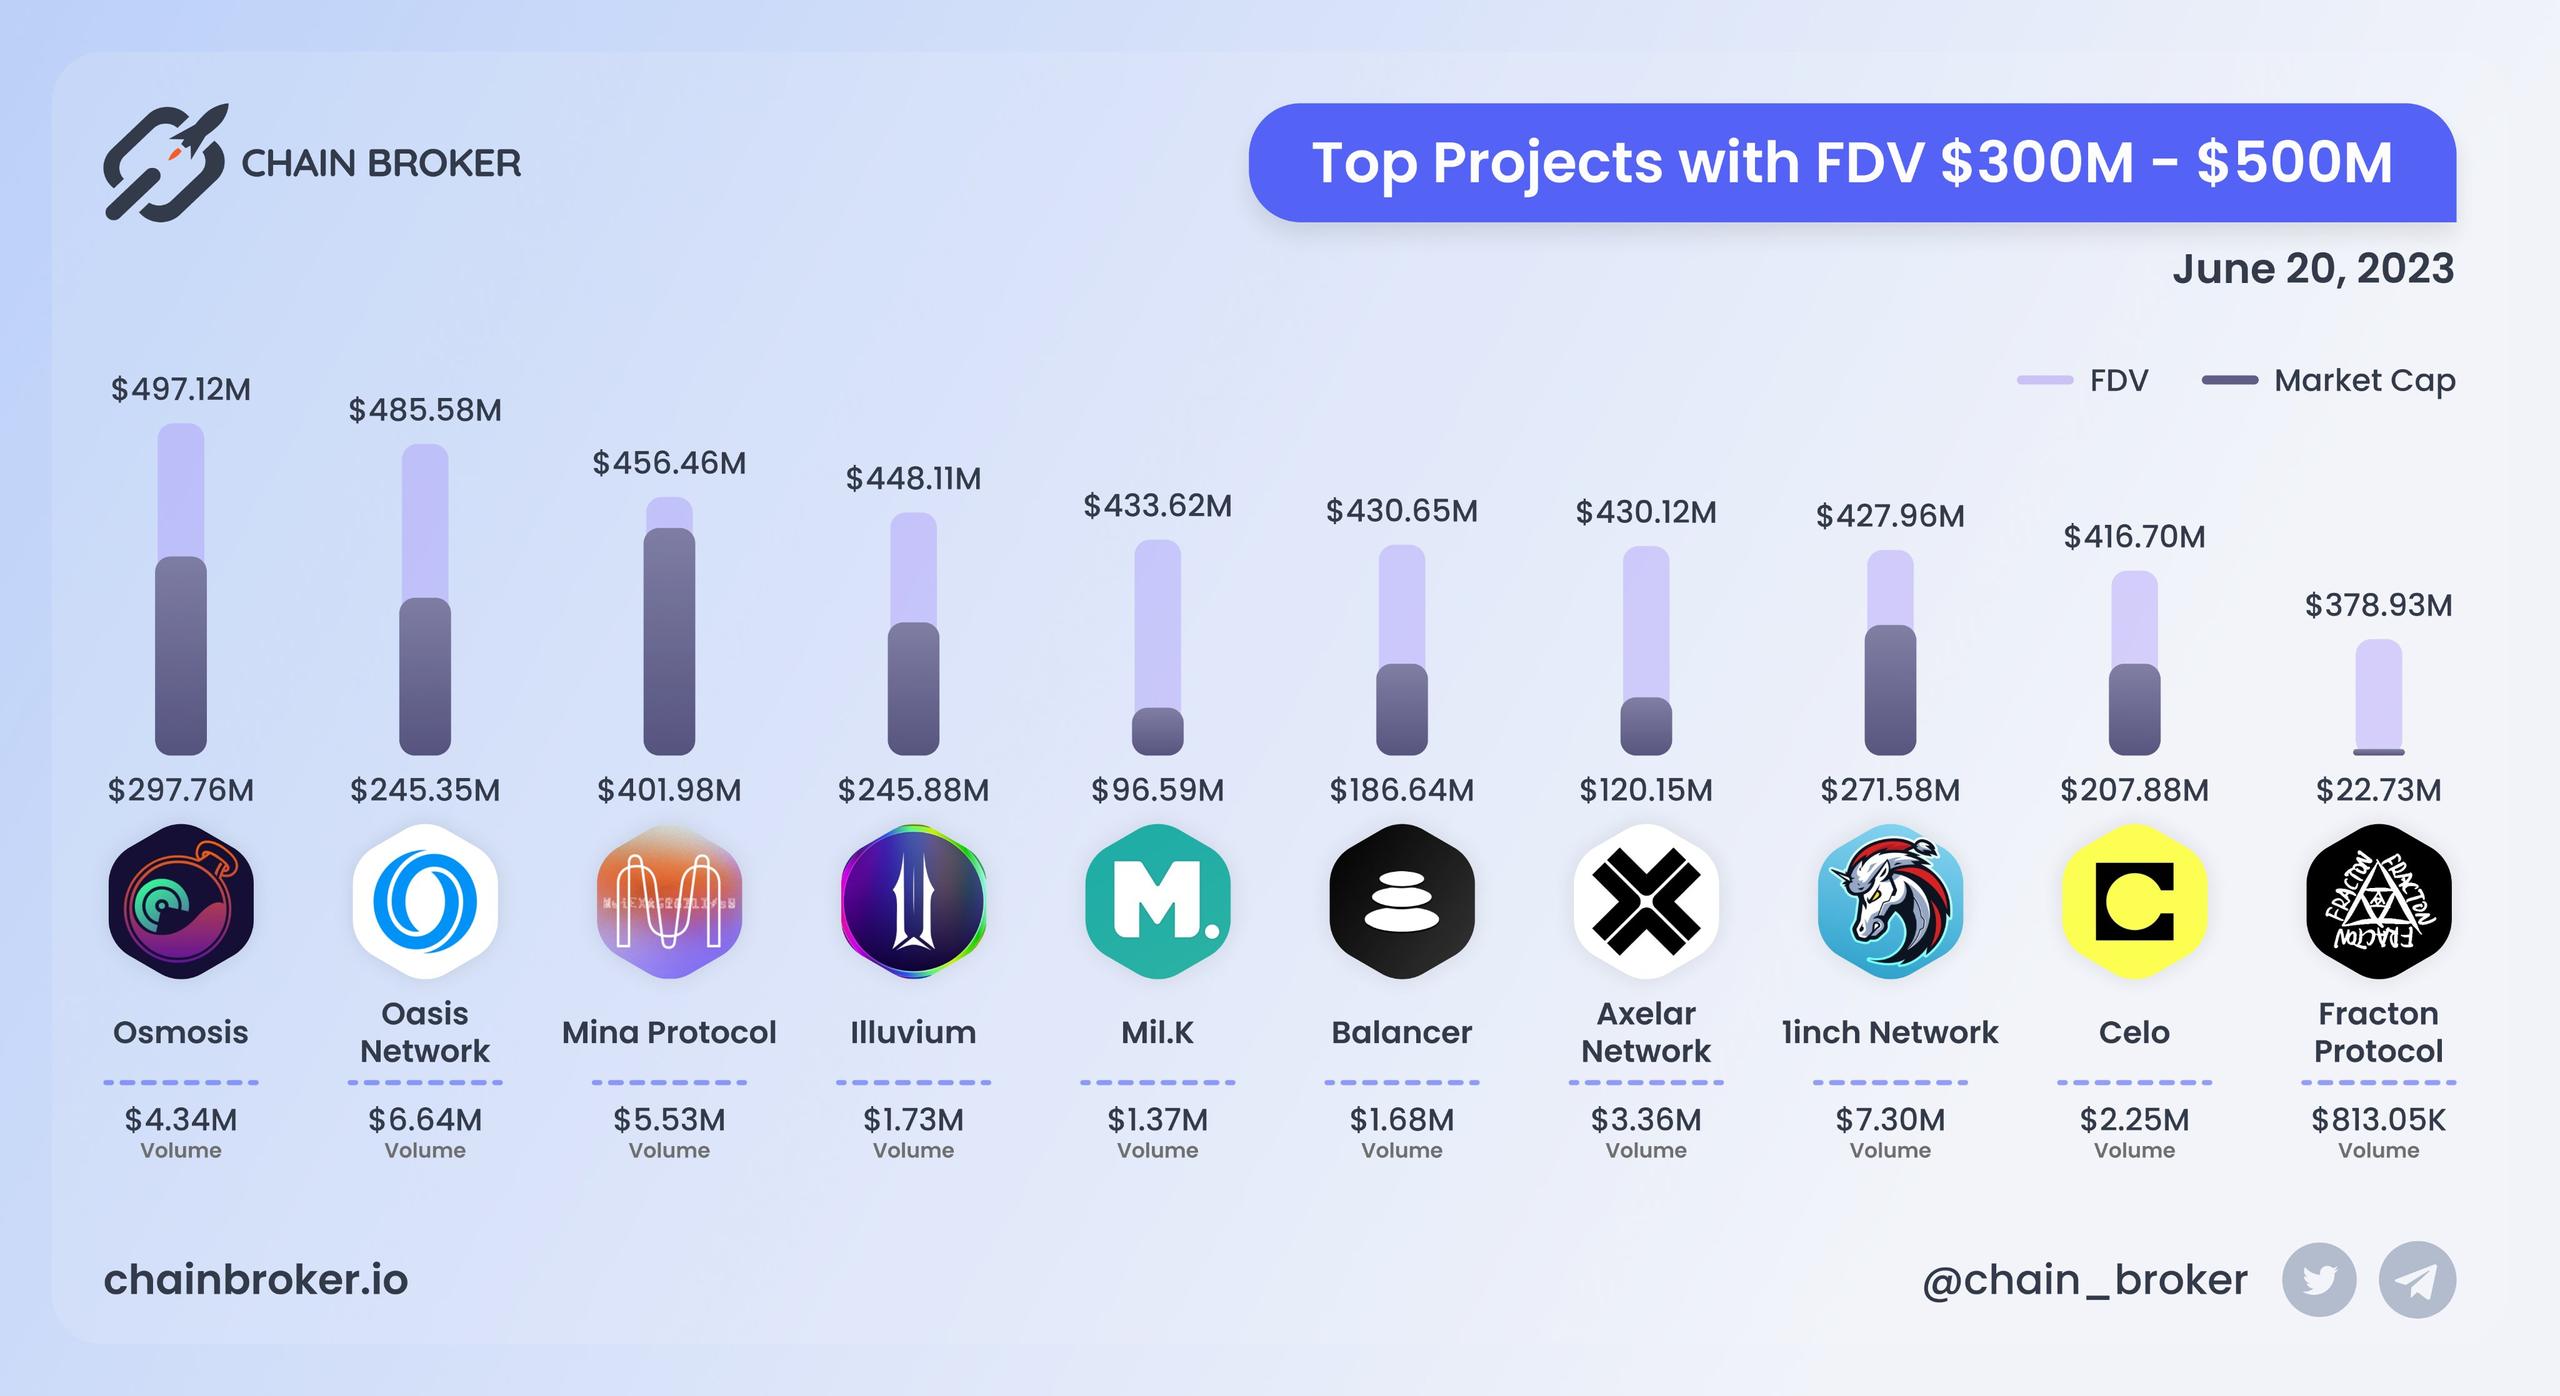 Top projects with FDV $300M - $500M